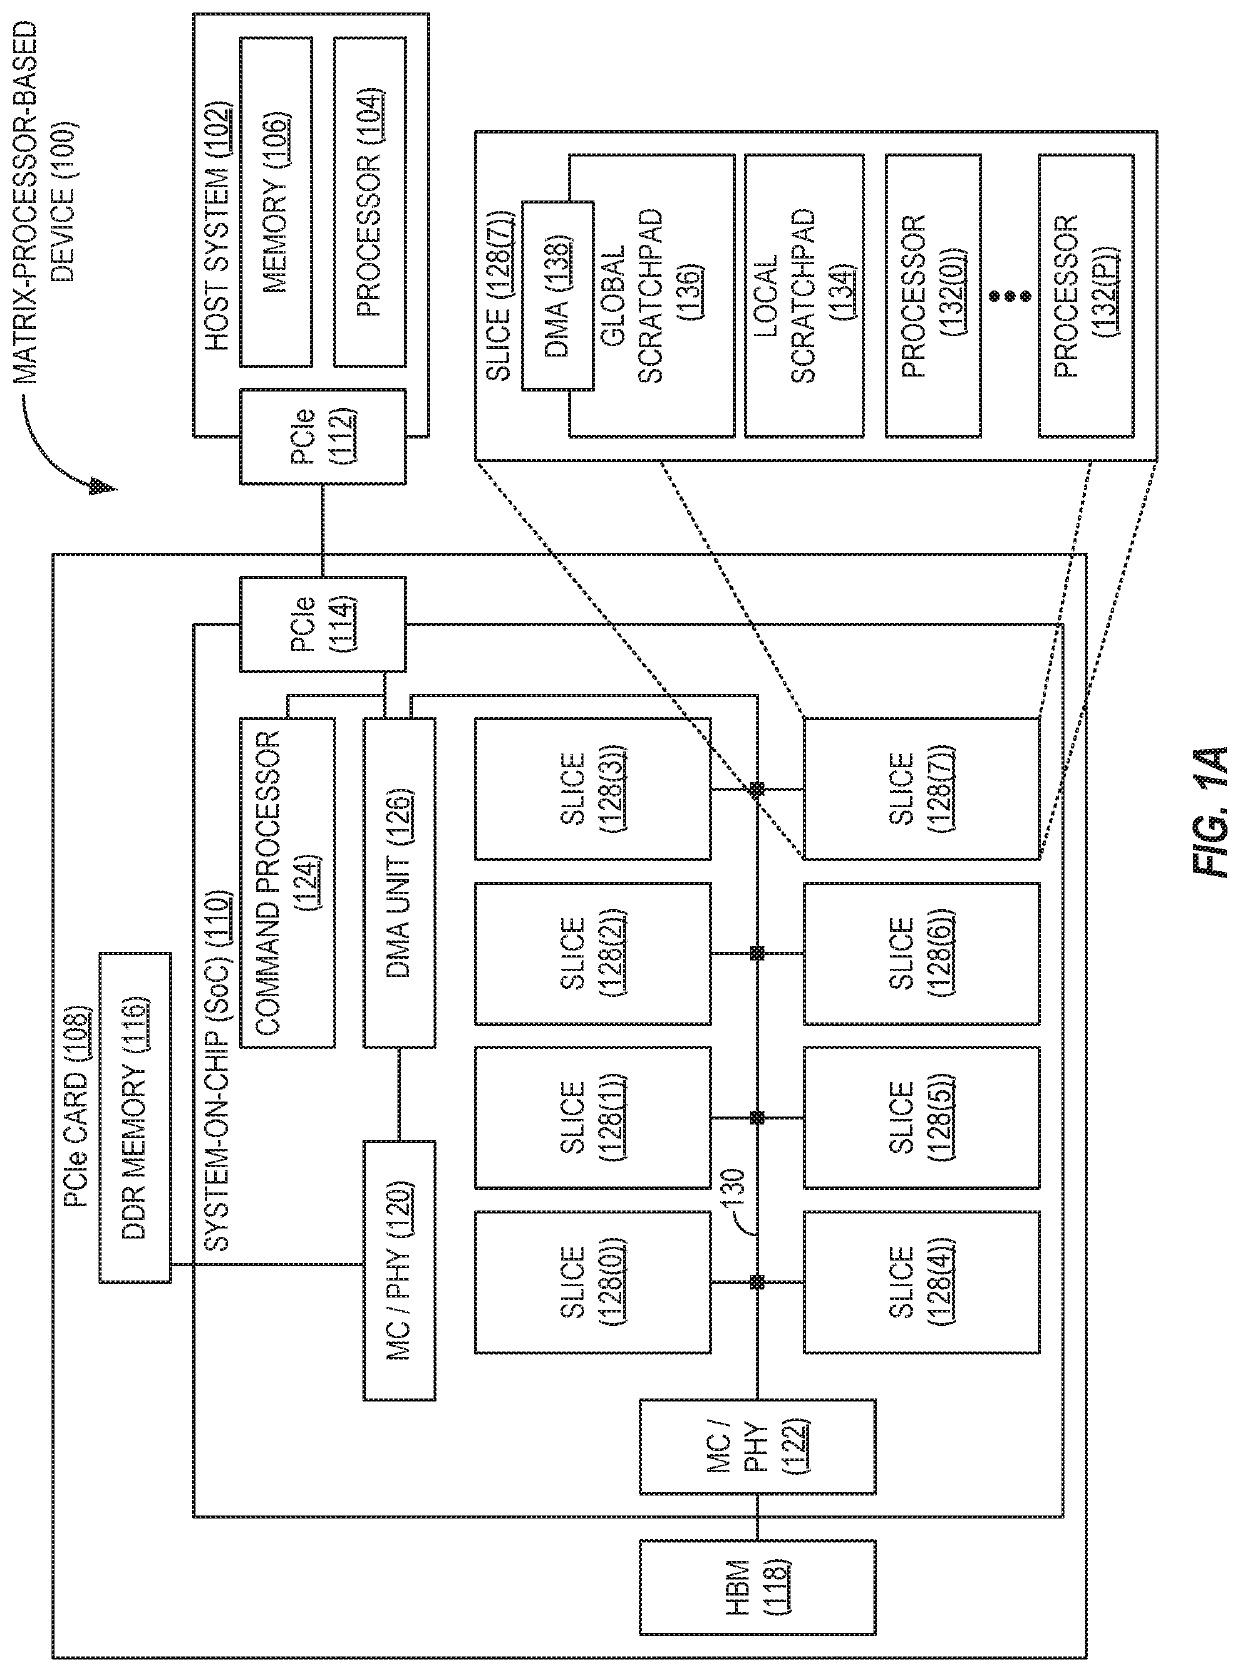 Providing efficient multiplication of sparse matrices in matrix-processor-based devices